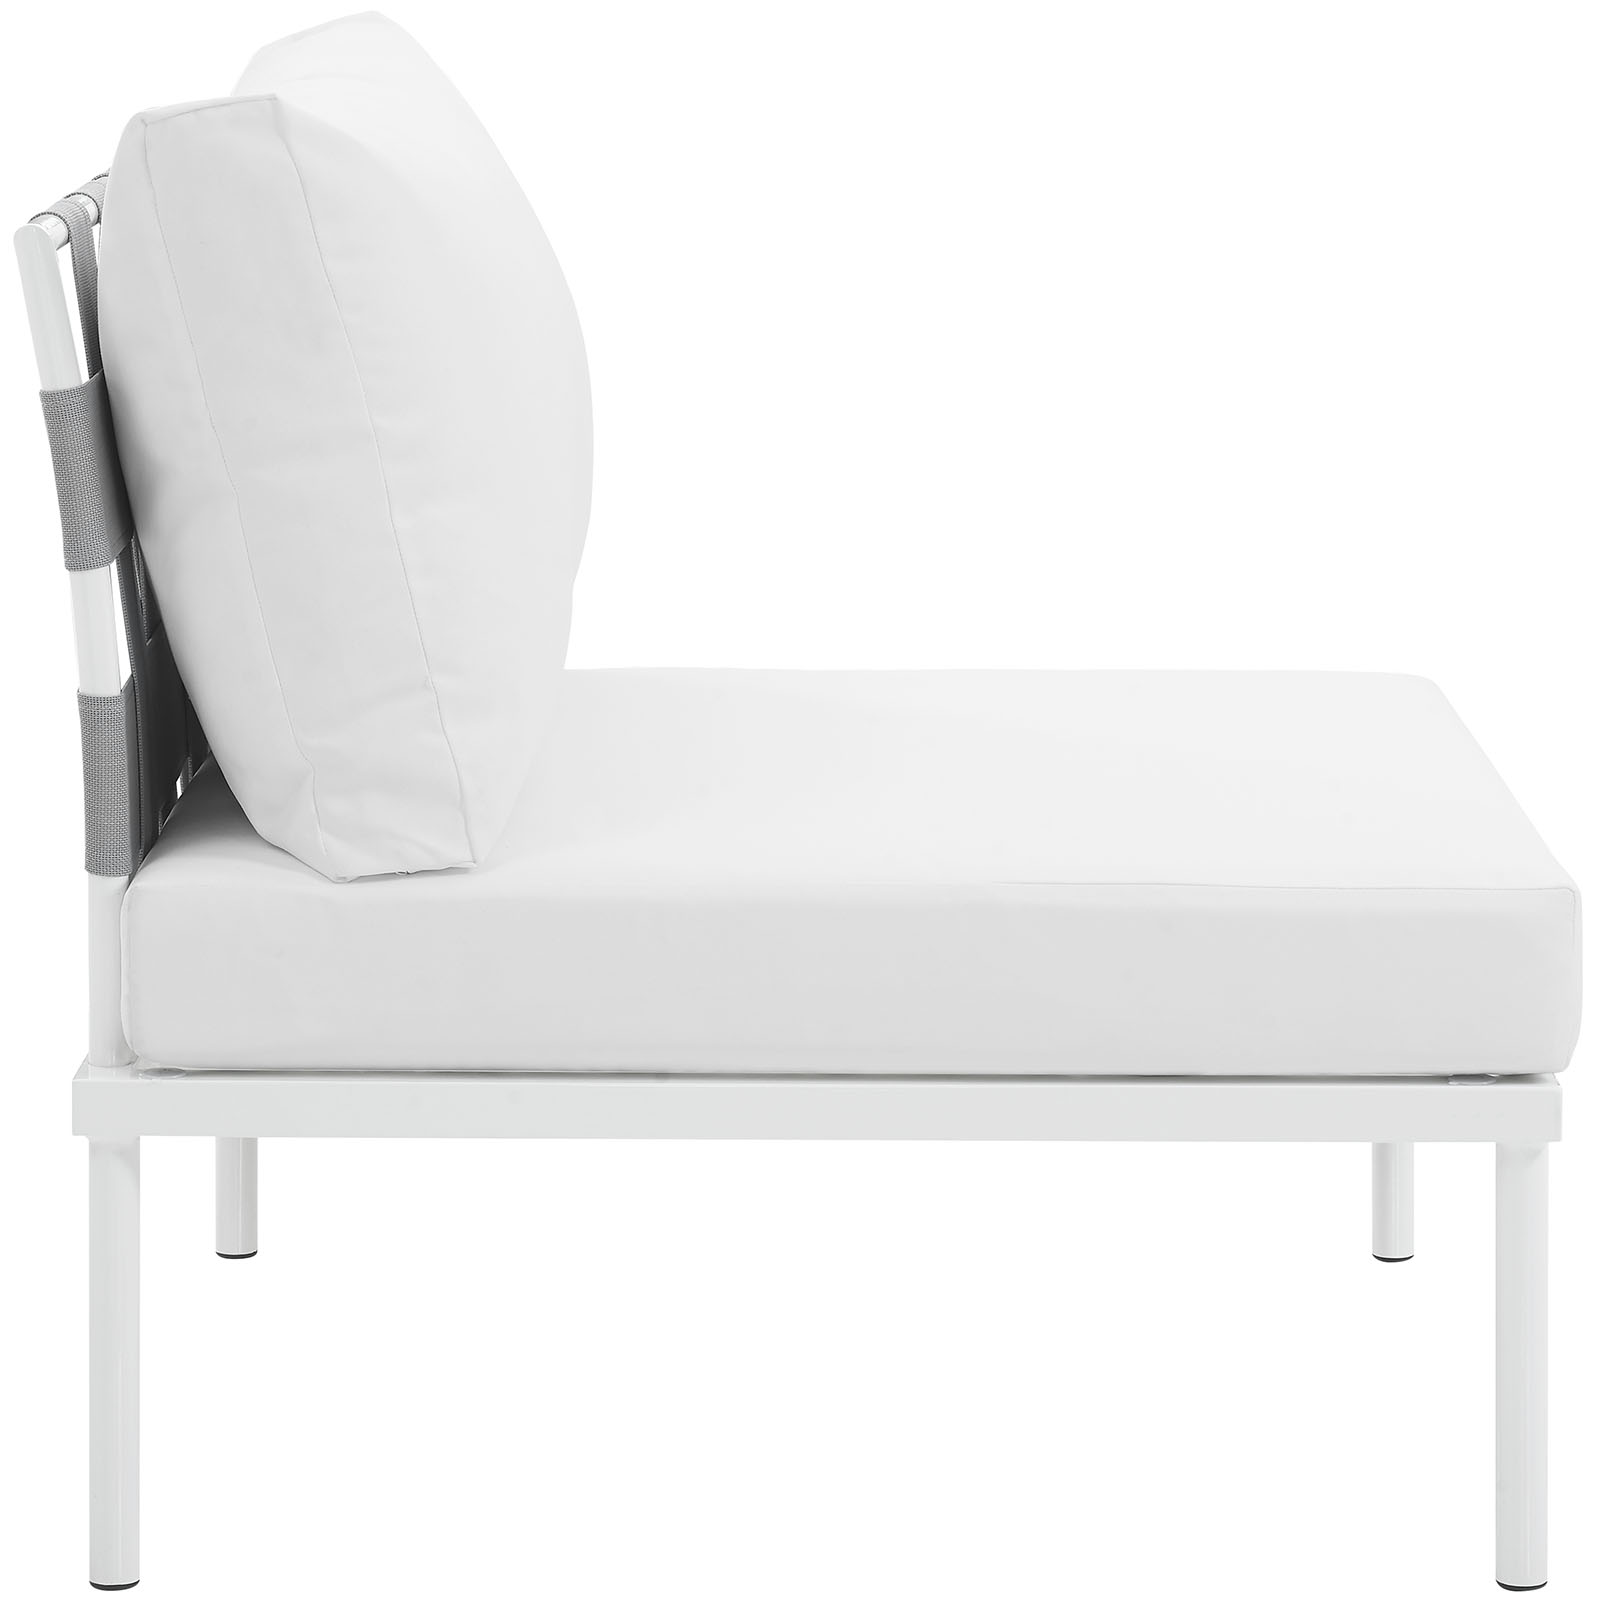 Modern Contemporary Urban Design Outdoor Patio Balcony Lounge Chair, White, Rattan - image 2 of 5